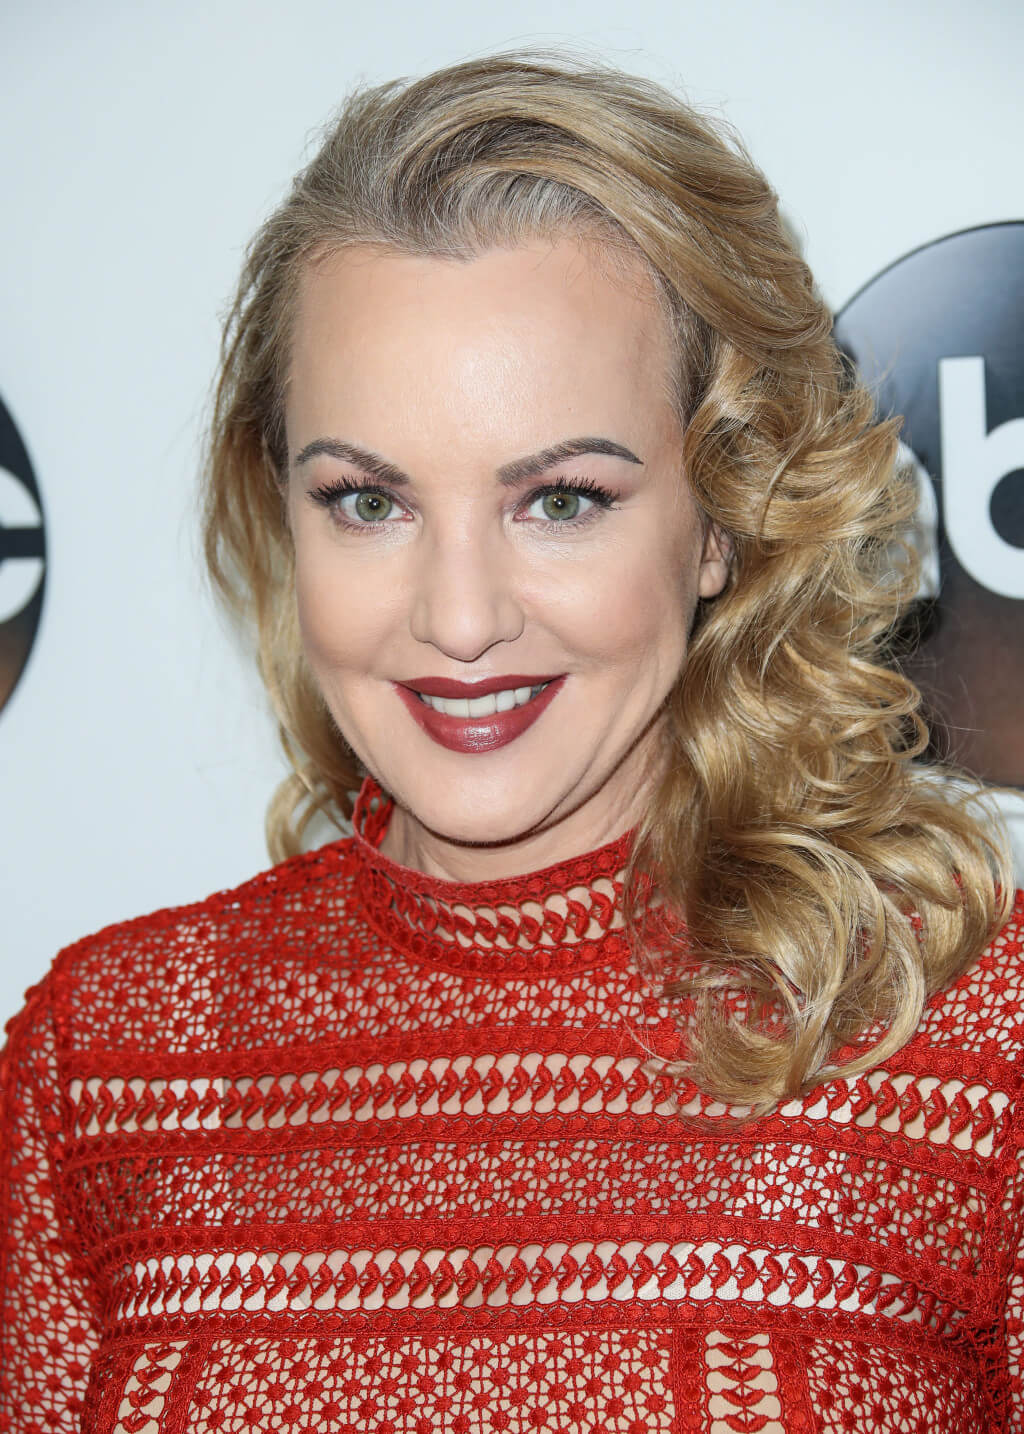 55 Hot And Sexy Pictures Of Wendi McLendon-Covey Is Going To Make Your Day A Win 4